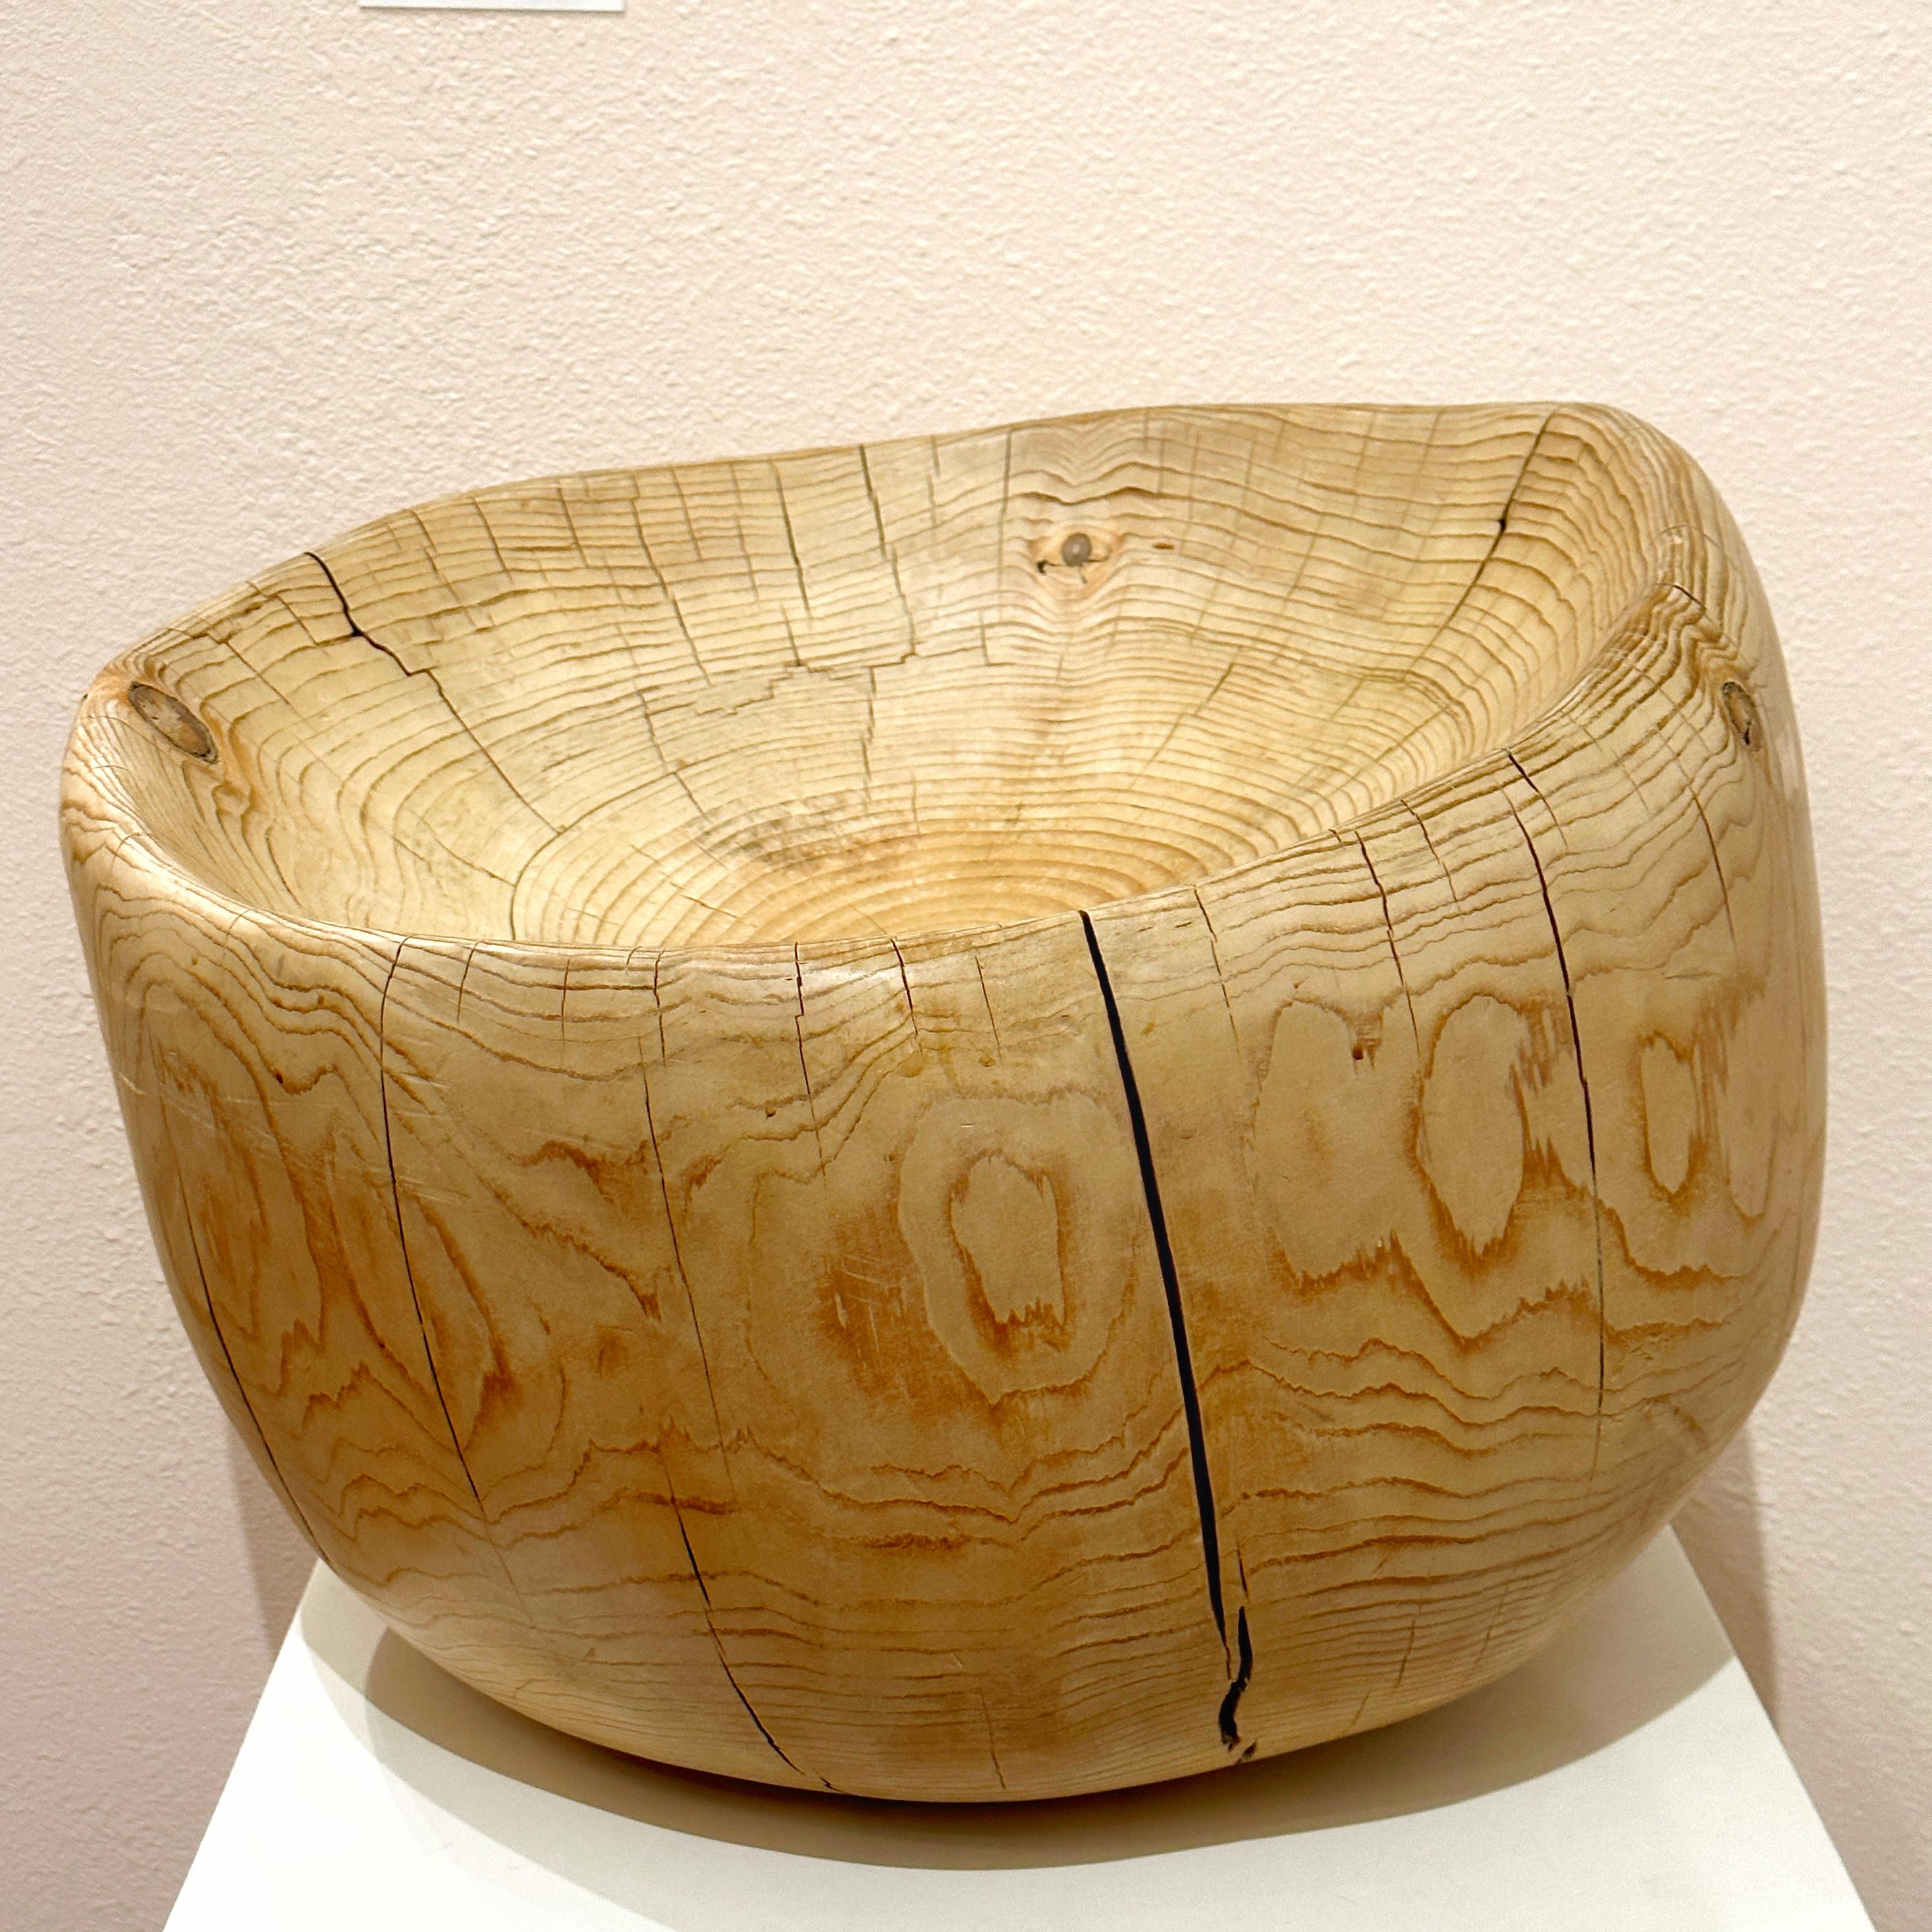 Late 20th Century Daniel Pollock Organic Modern Carved Pine Wood Stool or Sculptural Object, 1995 For Sale